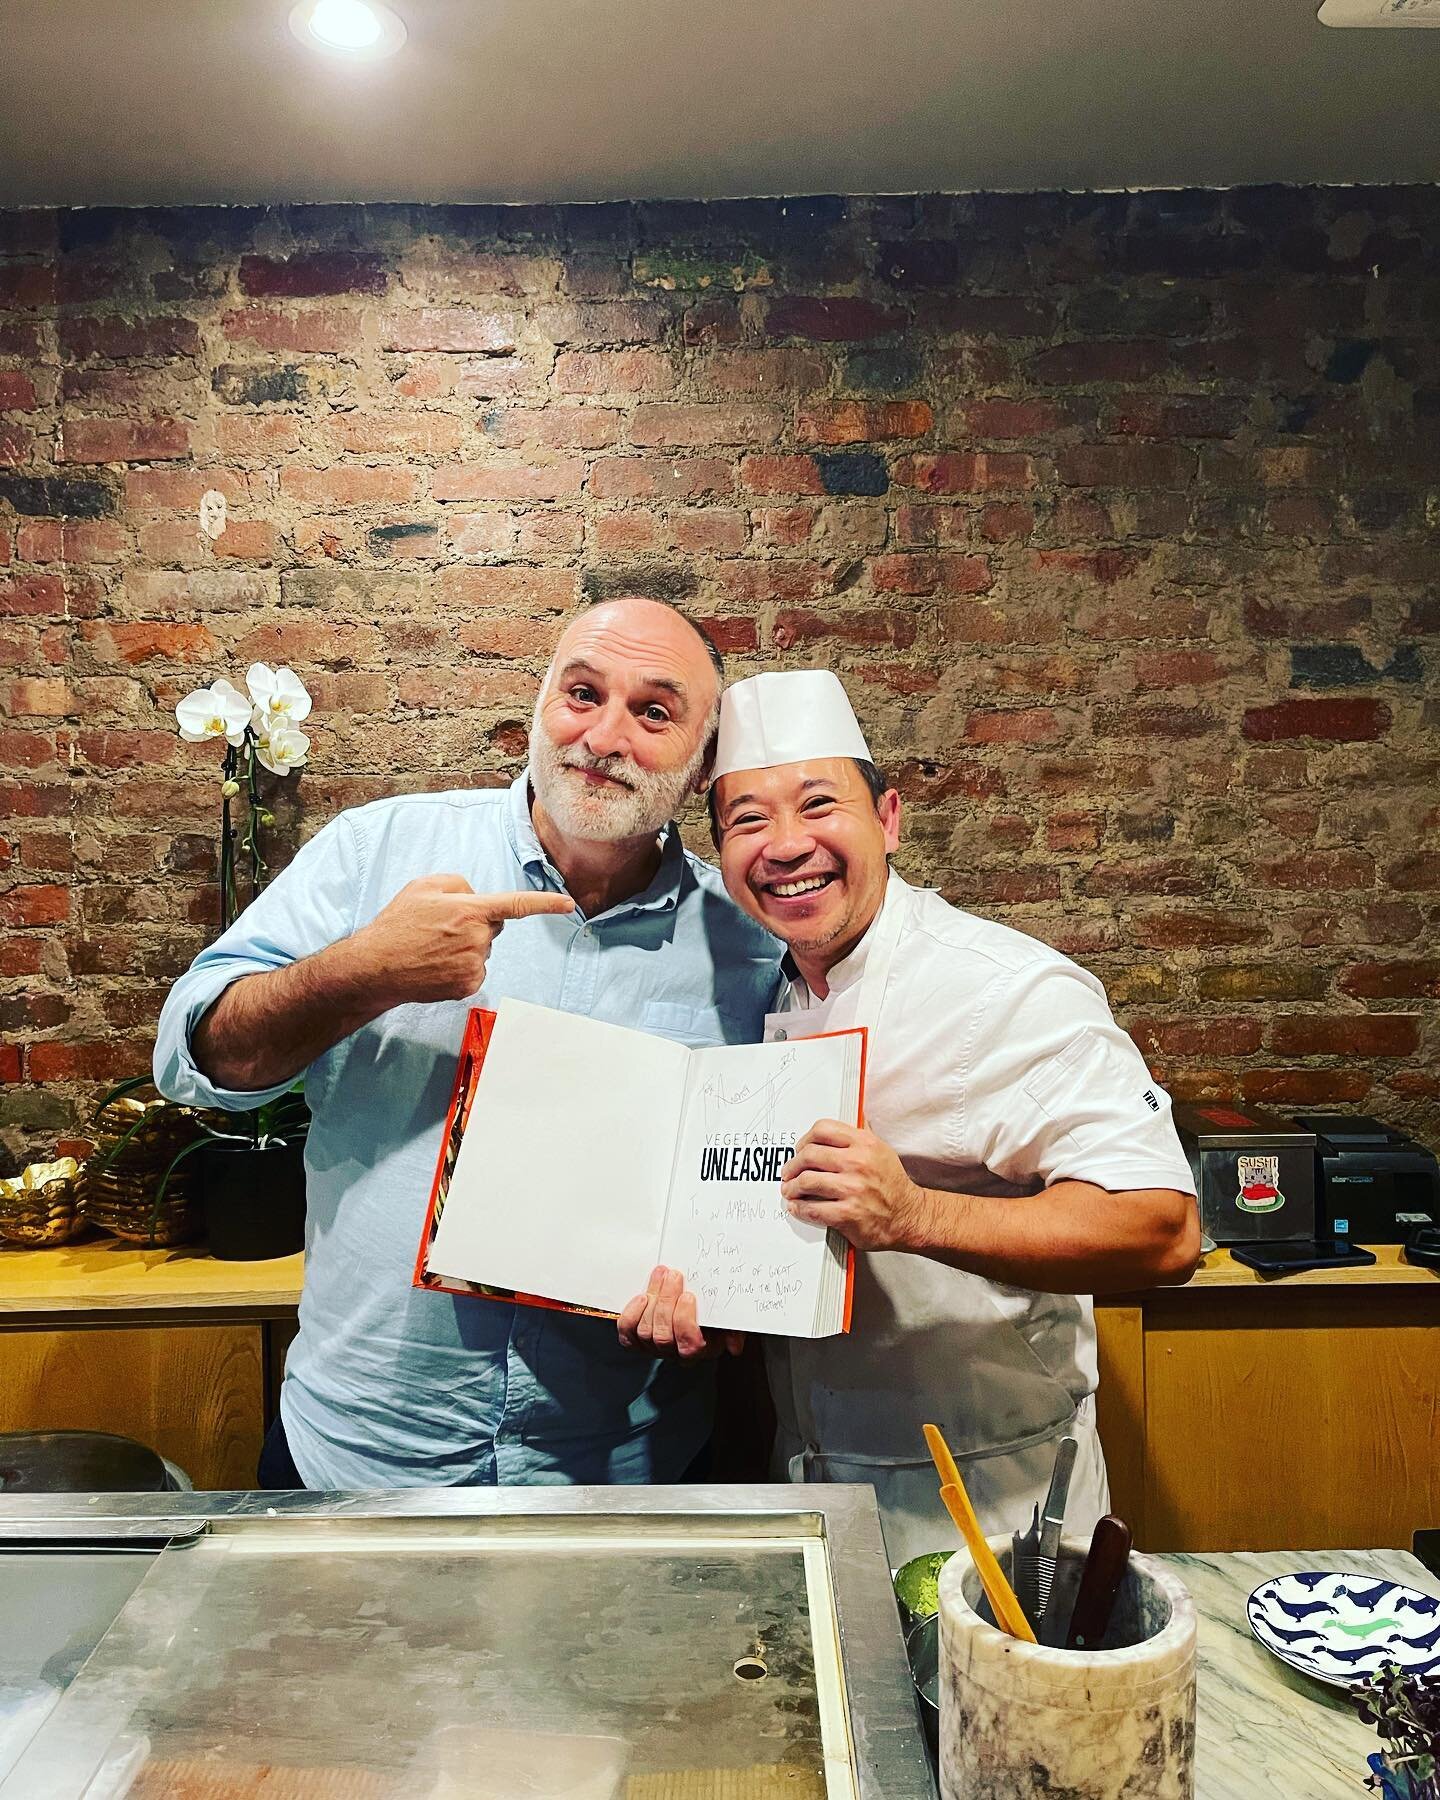 ❤️It was such an honor for us to have Chef Jos&eacute; Andr&eacute;s &amp; family dined with us . Always so much respects and admiration 👏🎉🎊❤️. Chef Jos&eacute; Andr&eacute;s @chefjoseandres and James Beard award-winning writer Matt Goulding, &ldq